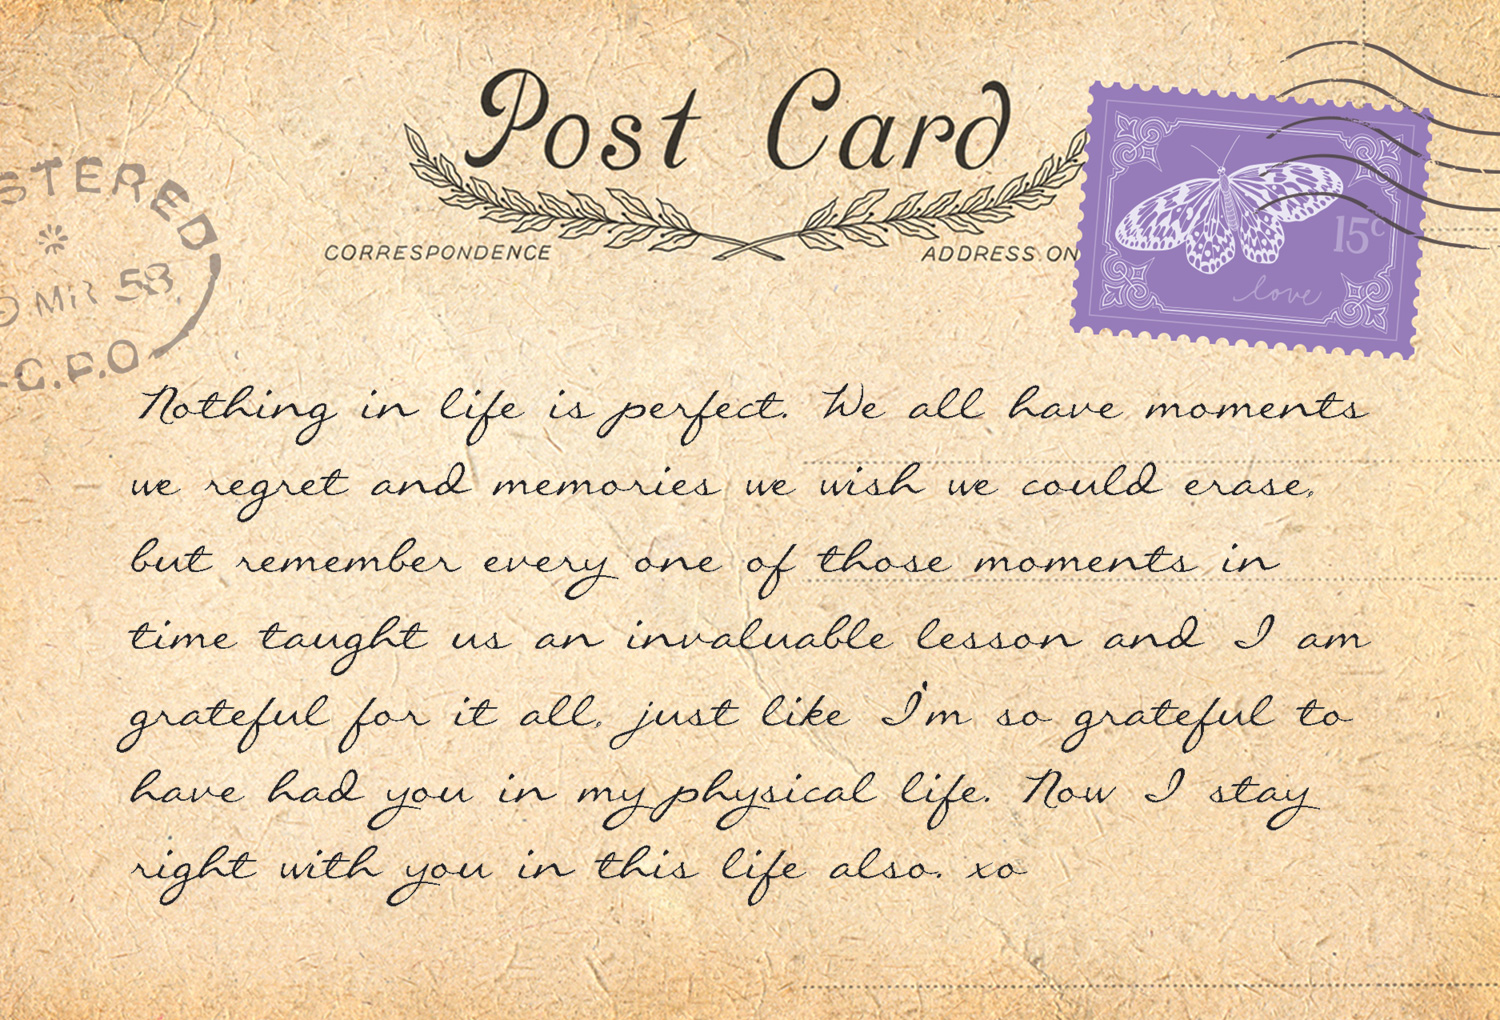 POSTCARDS FROM HEAVEN 2 - back 19